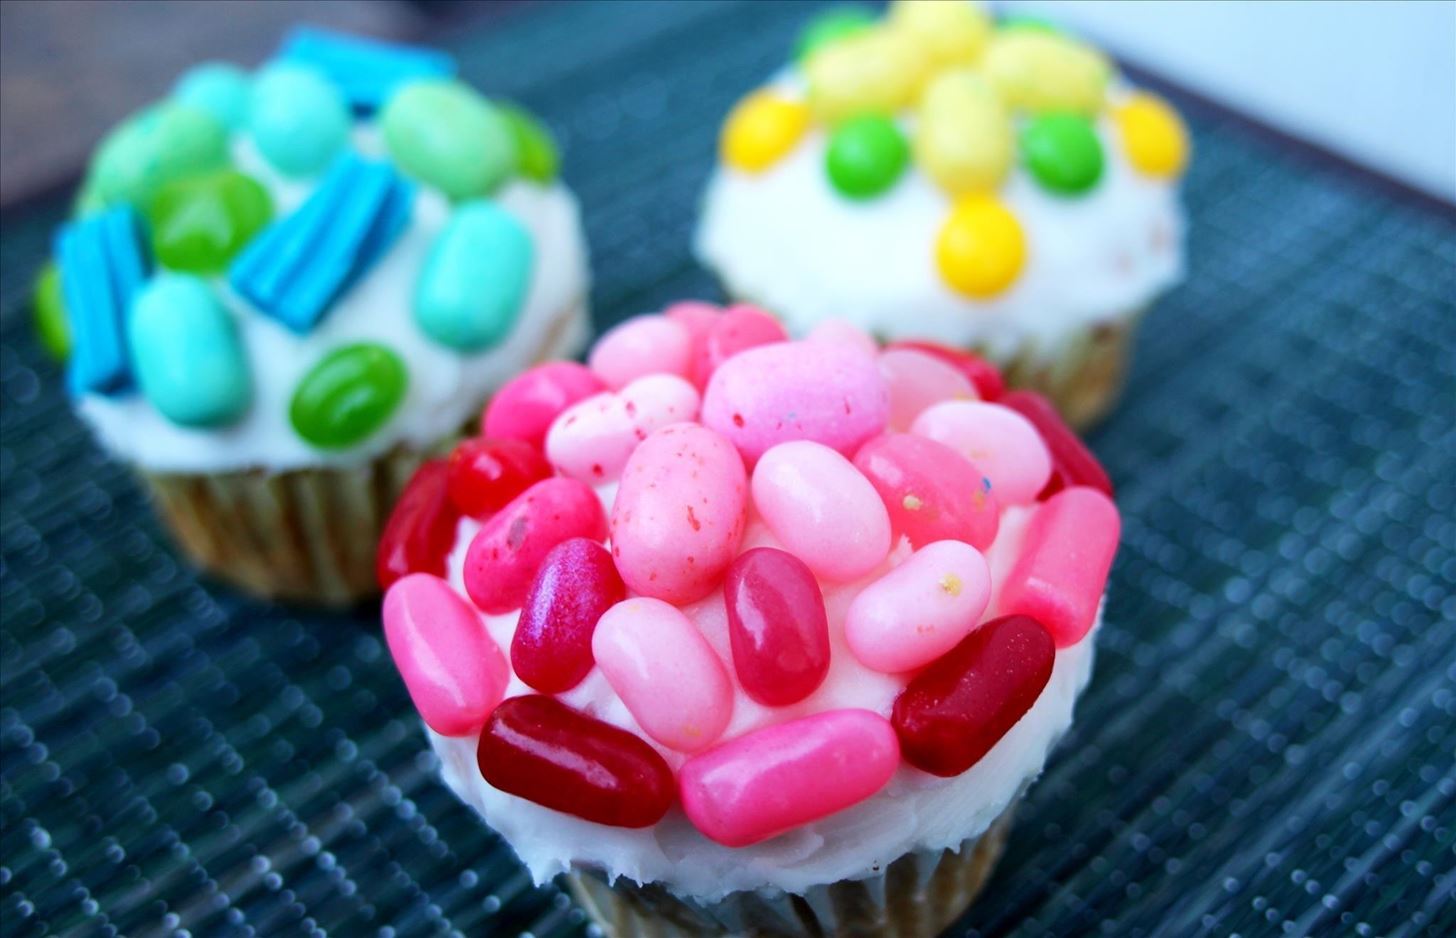 This Easy Tip Will Make Your Homemade Cupcakes Look More Professional